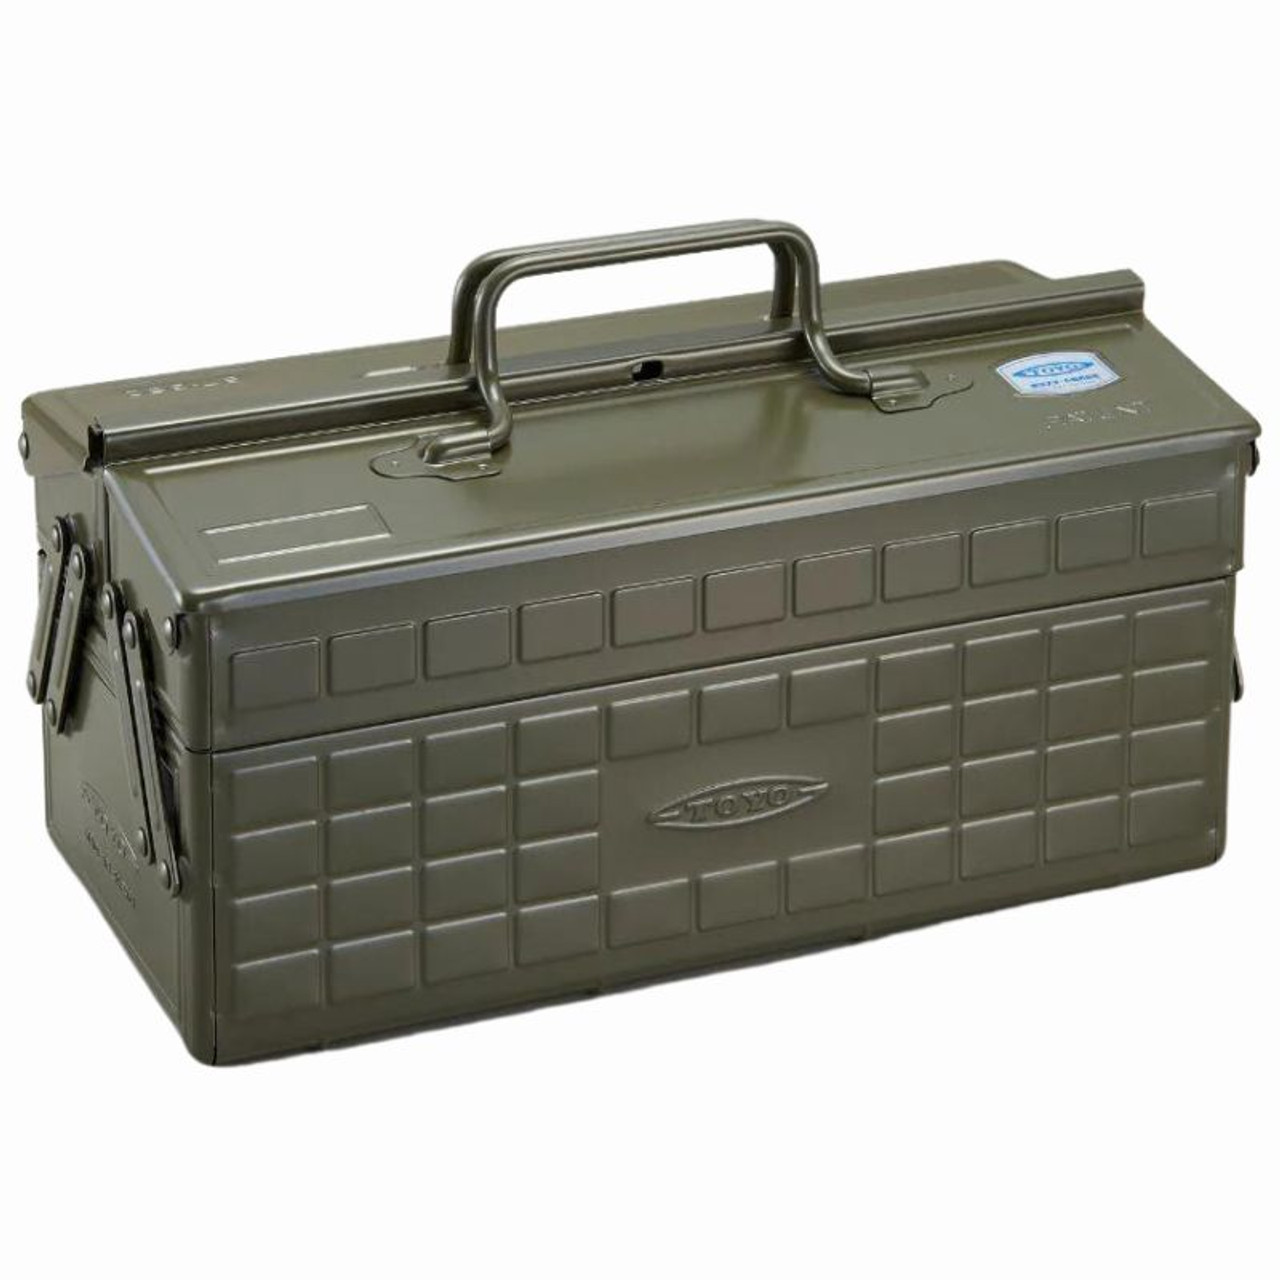 Toyo Cantilever Deluxe Toolbox, Moss Green - FLAX art & design